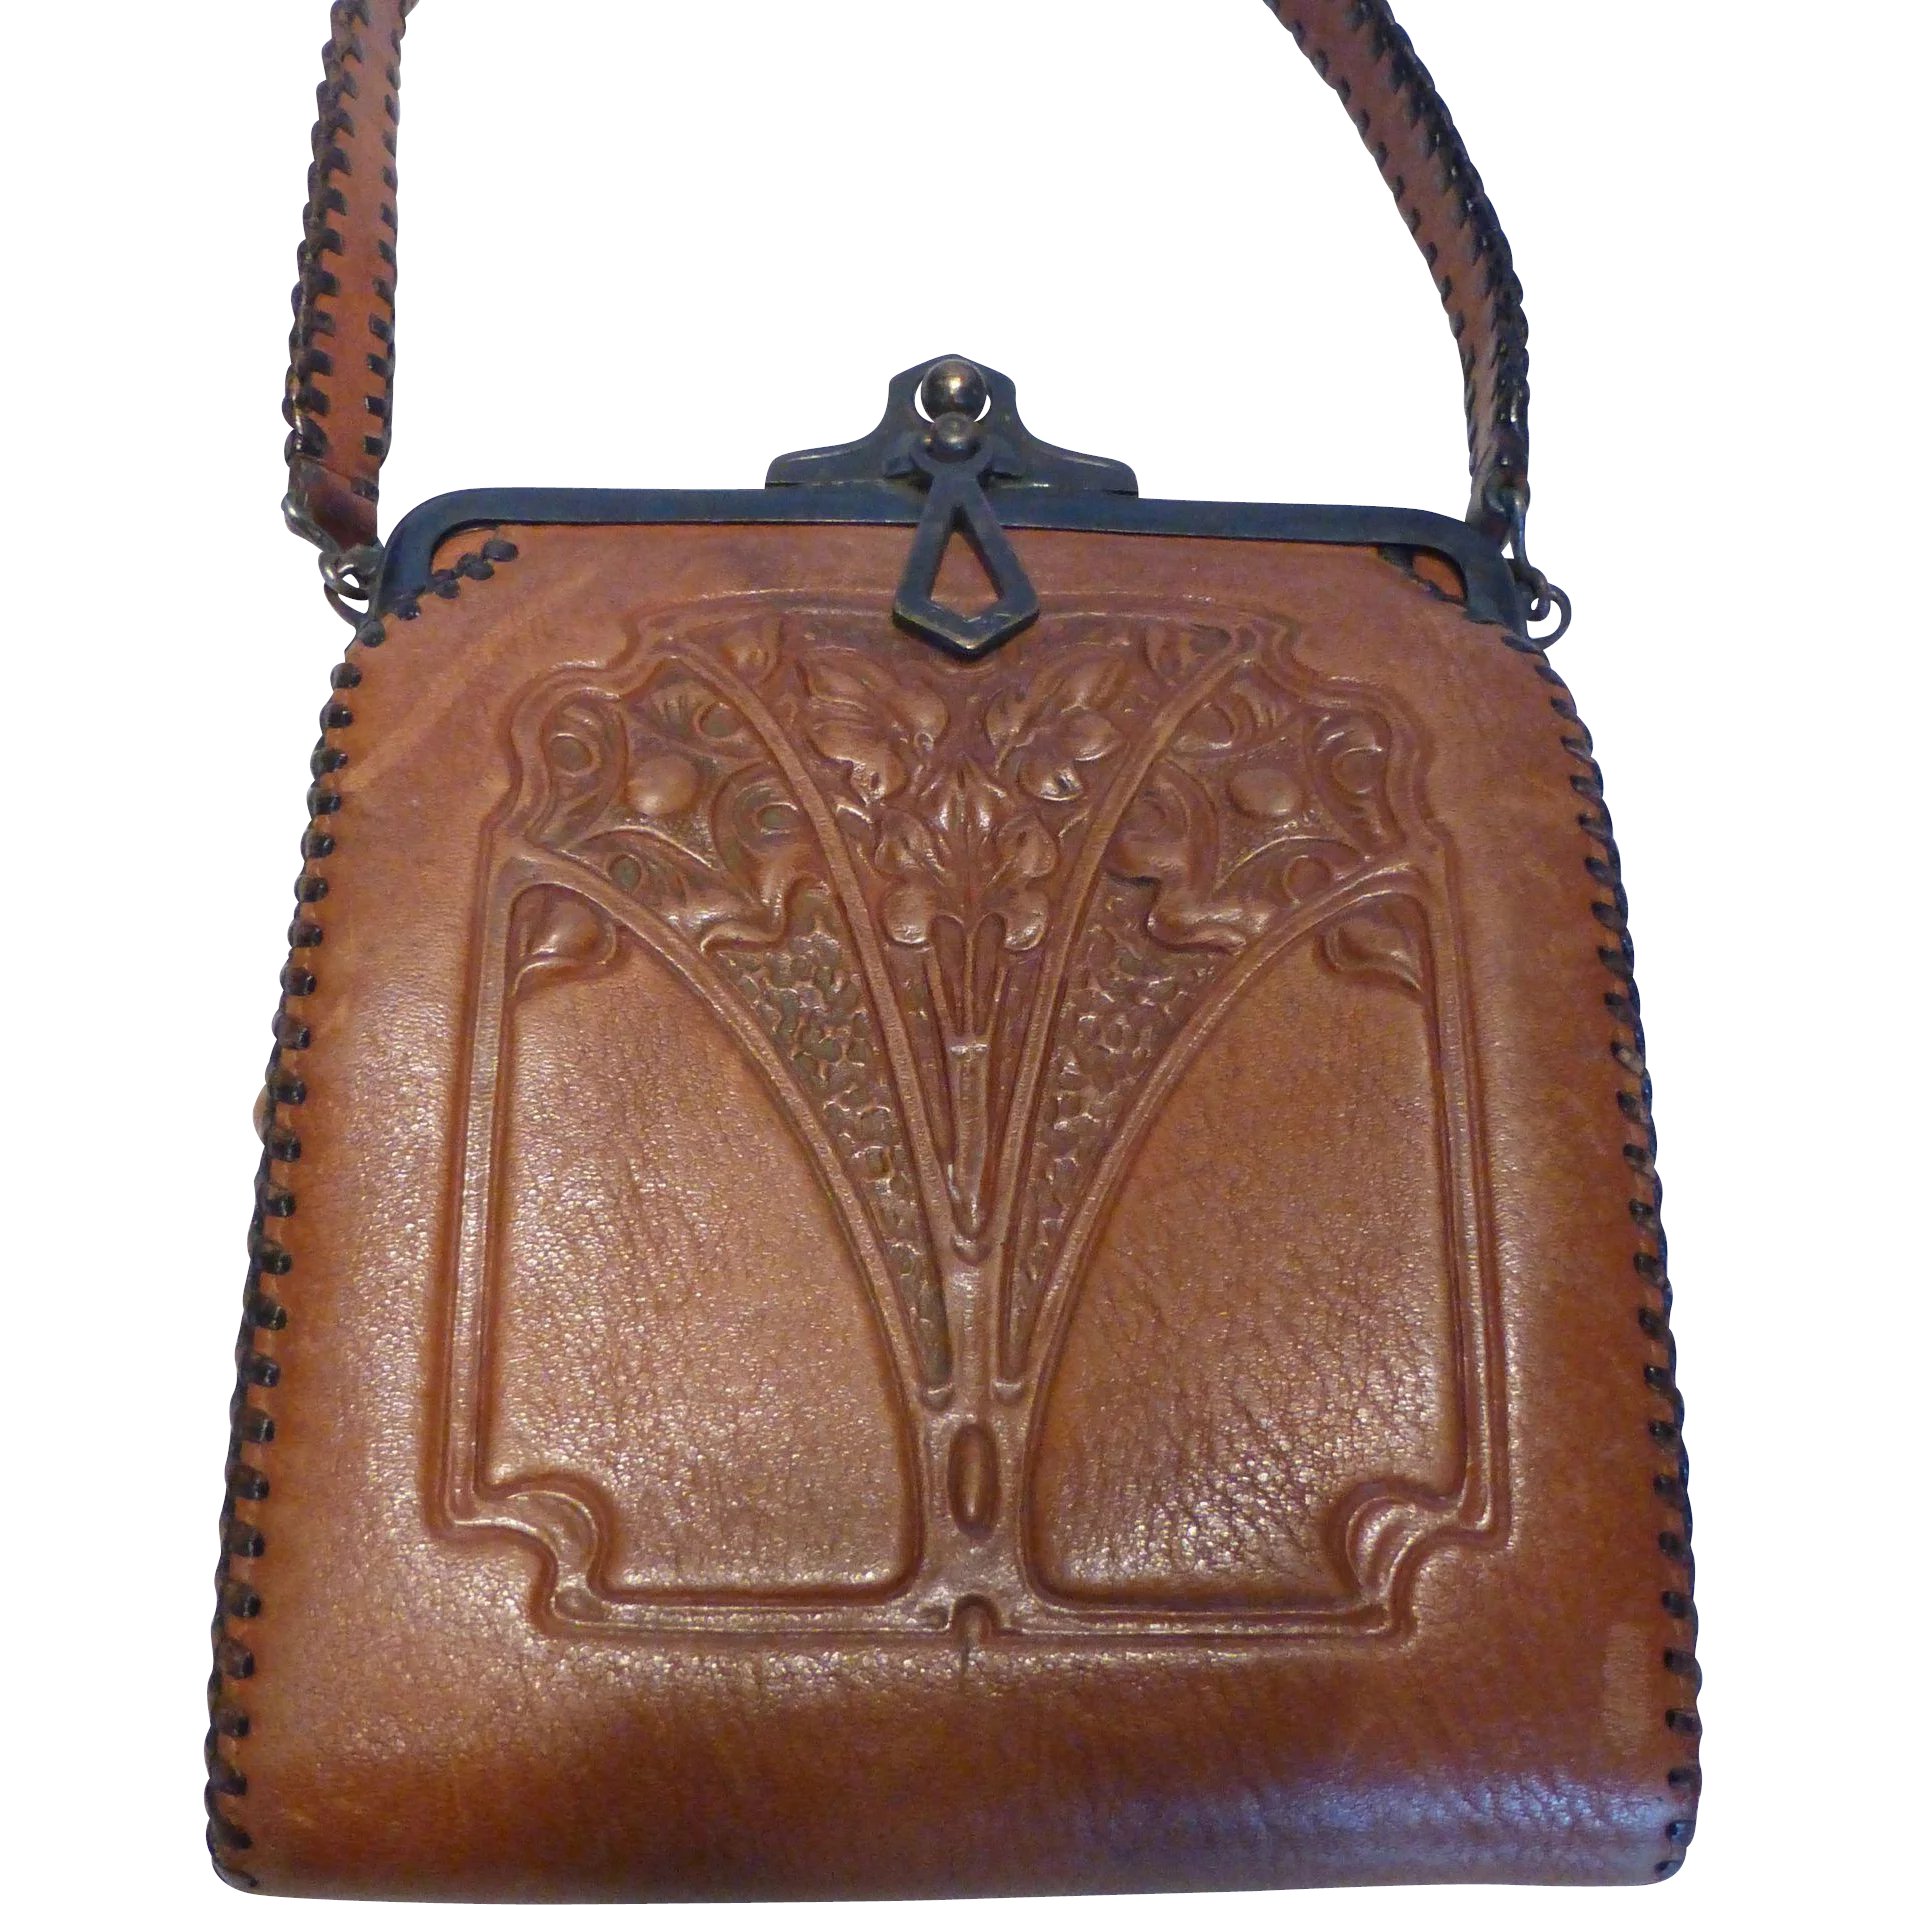 1920's Arts & Crafts Embossed Leather Purse Handbag by Nocona Bags ...